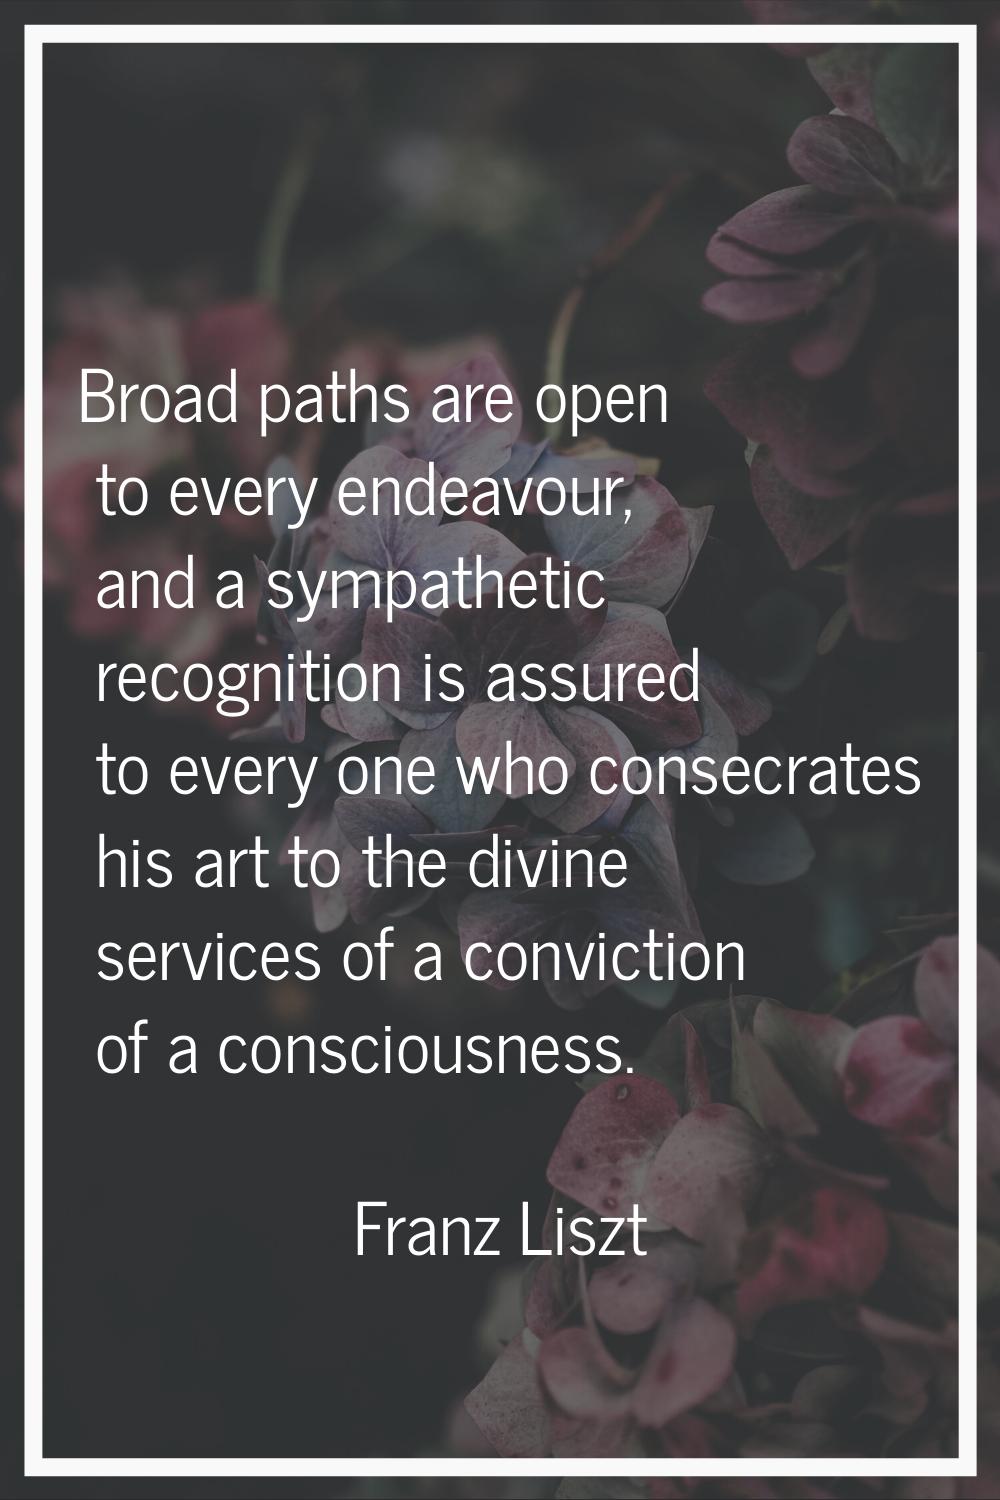 Broad paths are open to every endeavour, and a sympathetic recognition is assured to every one who 